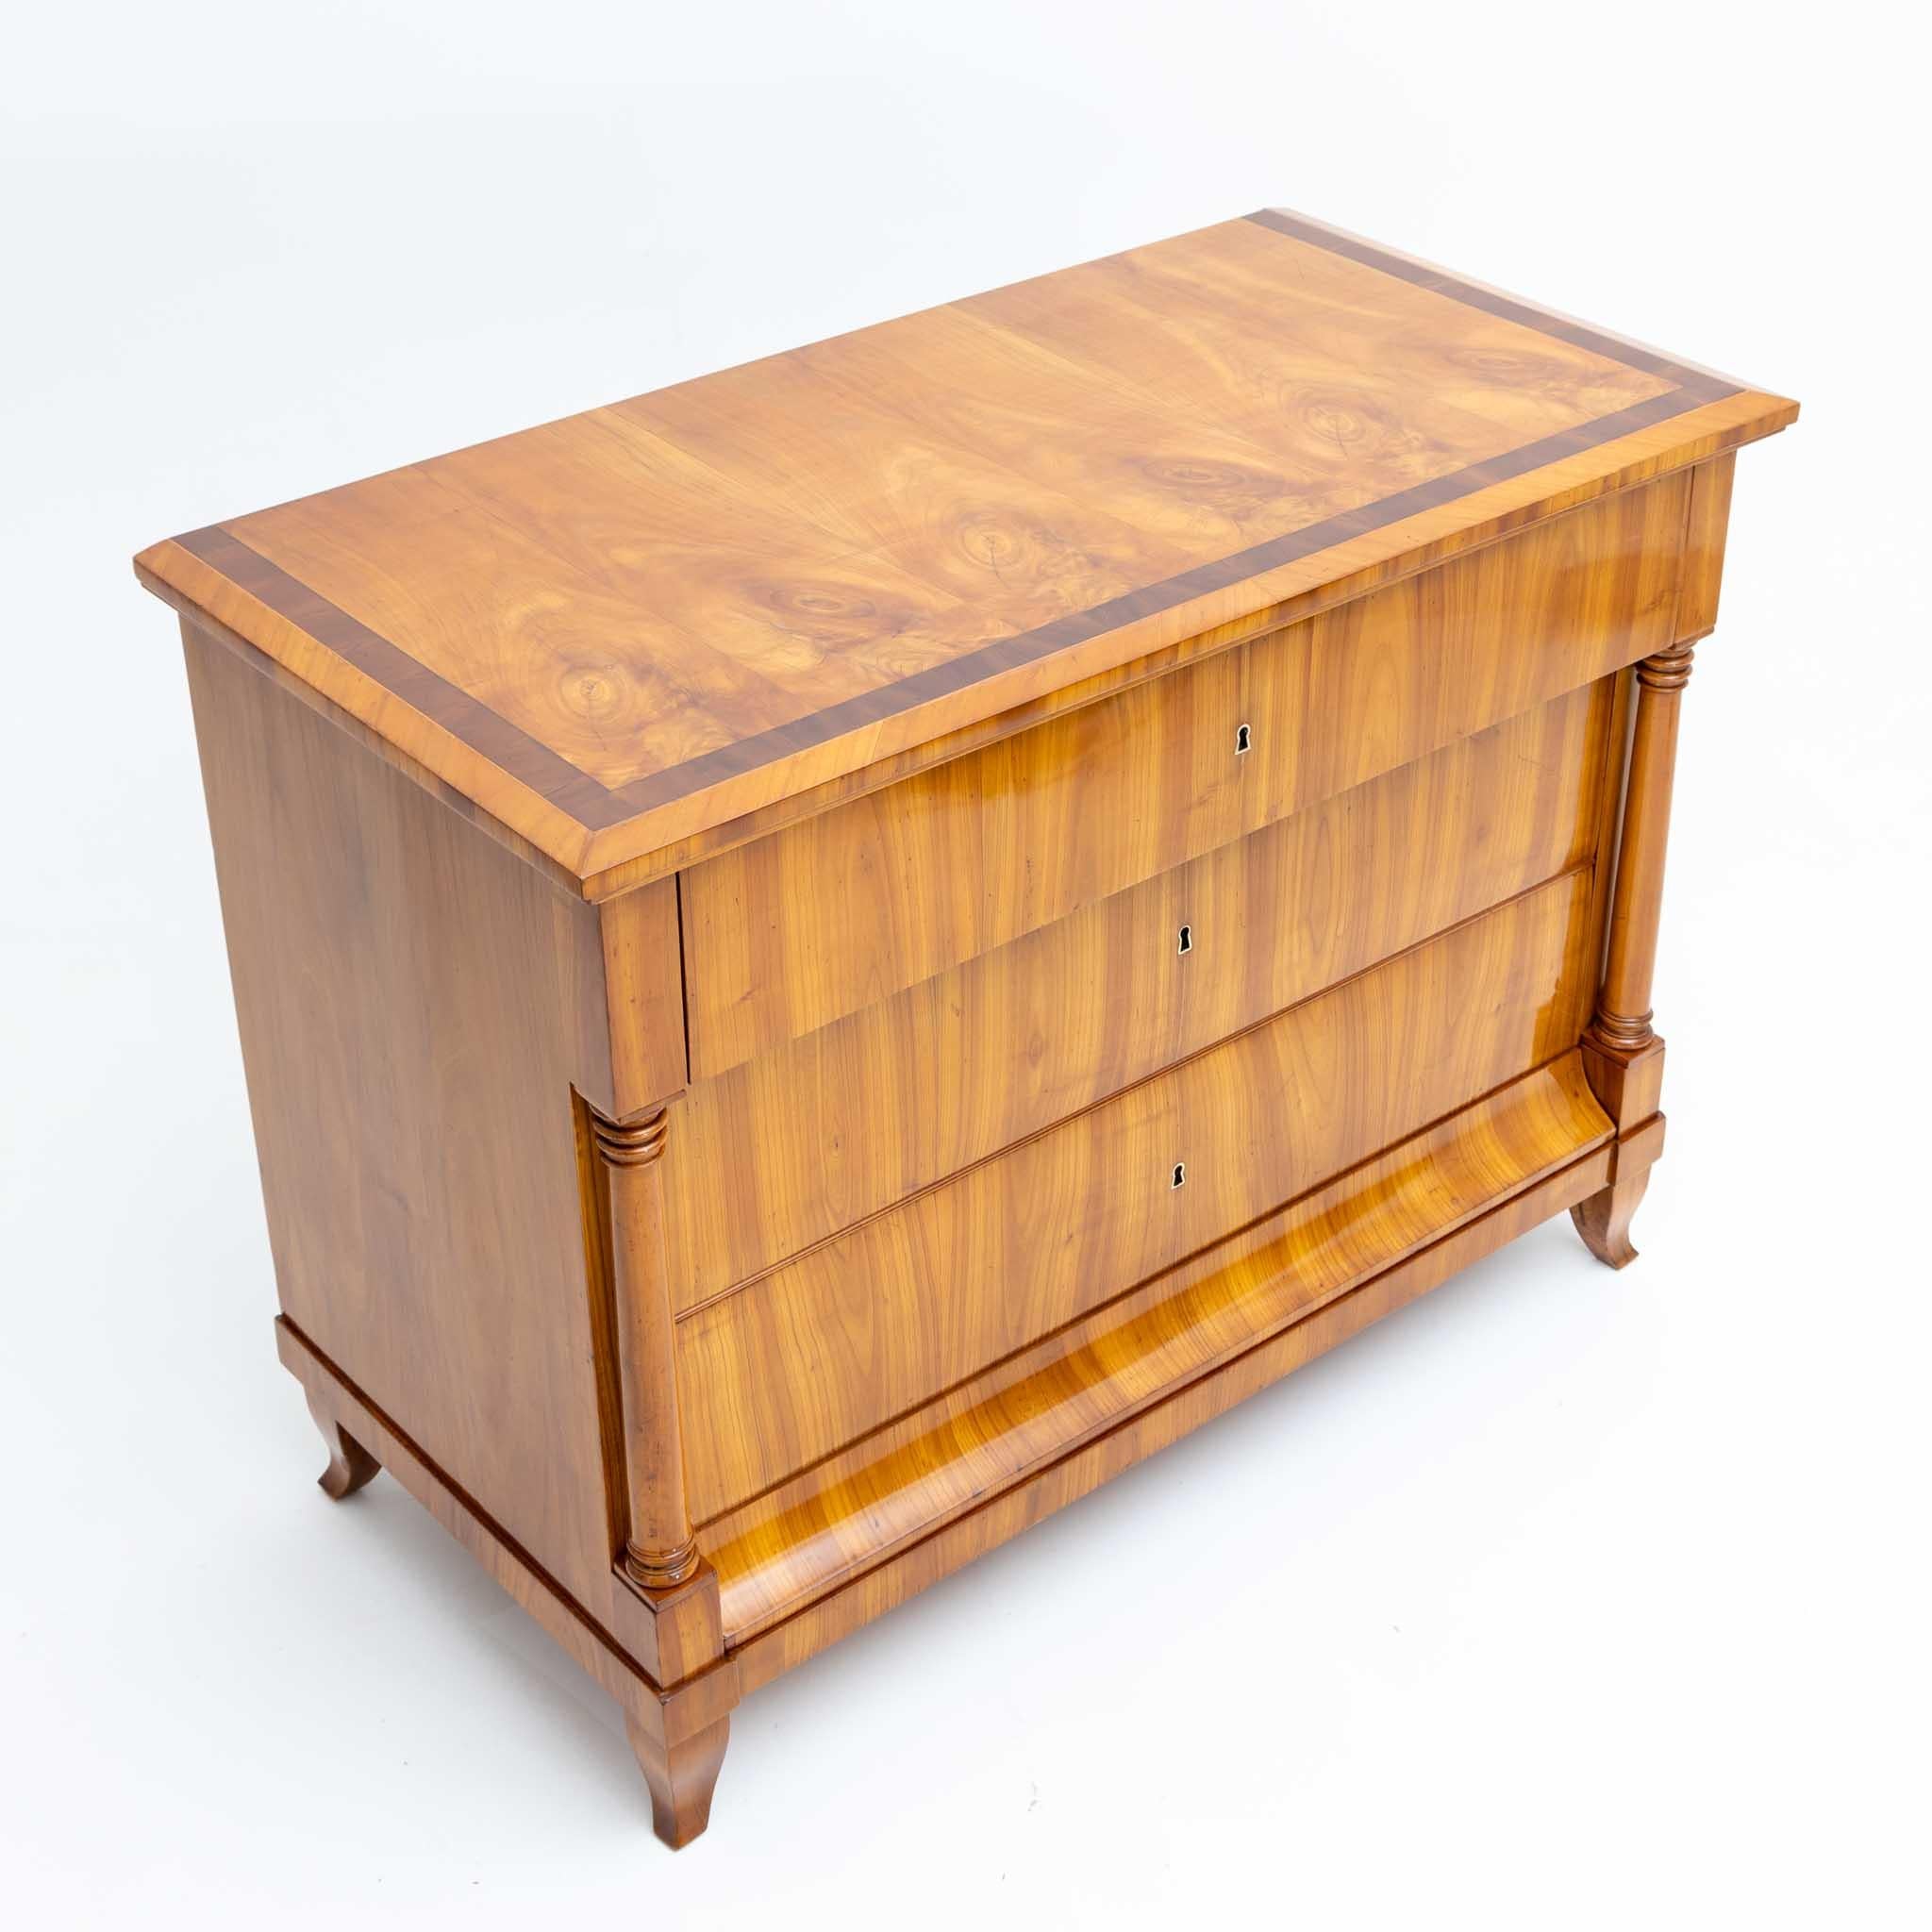 A fine Biedermeier chest of drawers. 
Crafted in cherrywood with columns flanking the
lower two drawers and fruitwood inlay on the top.